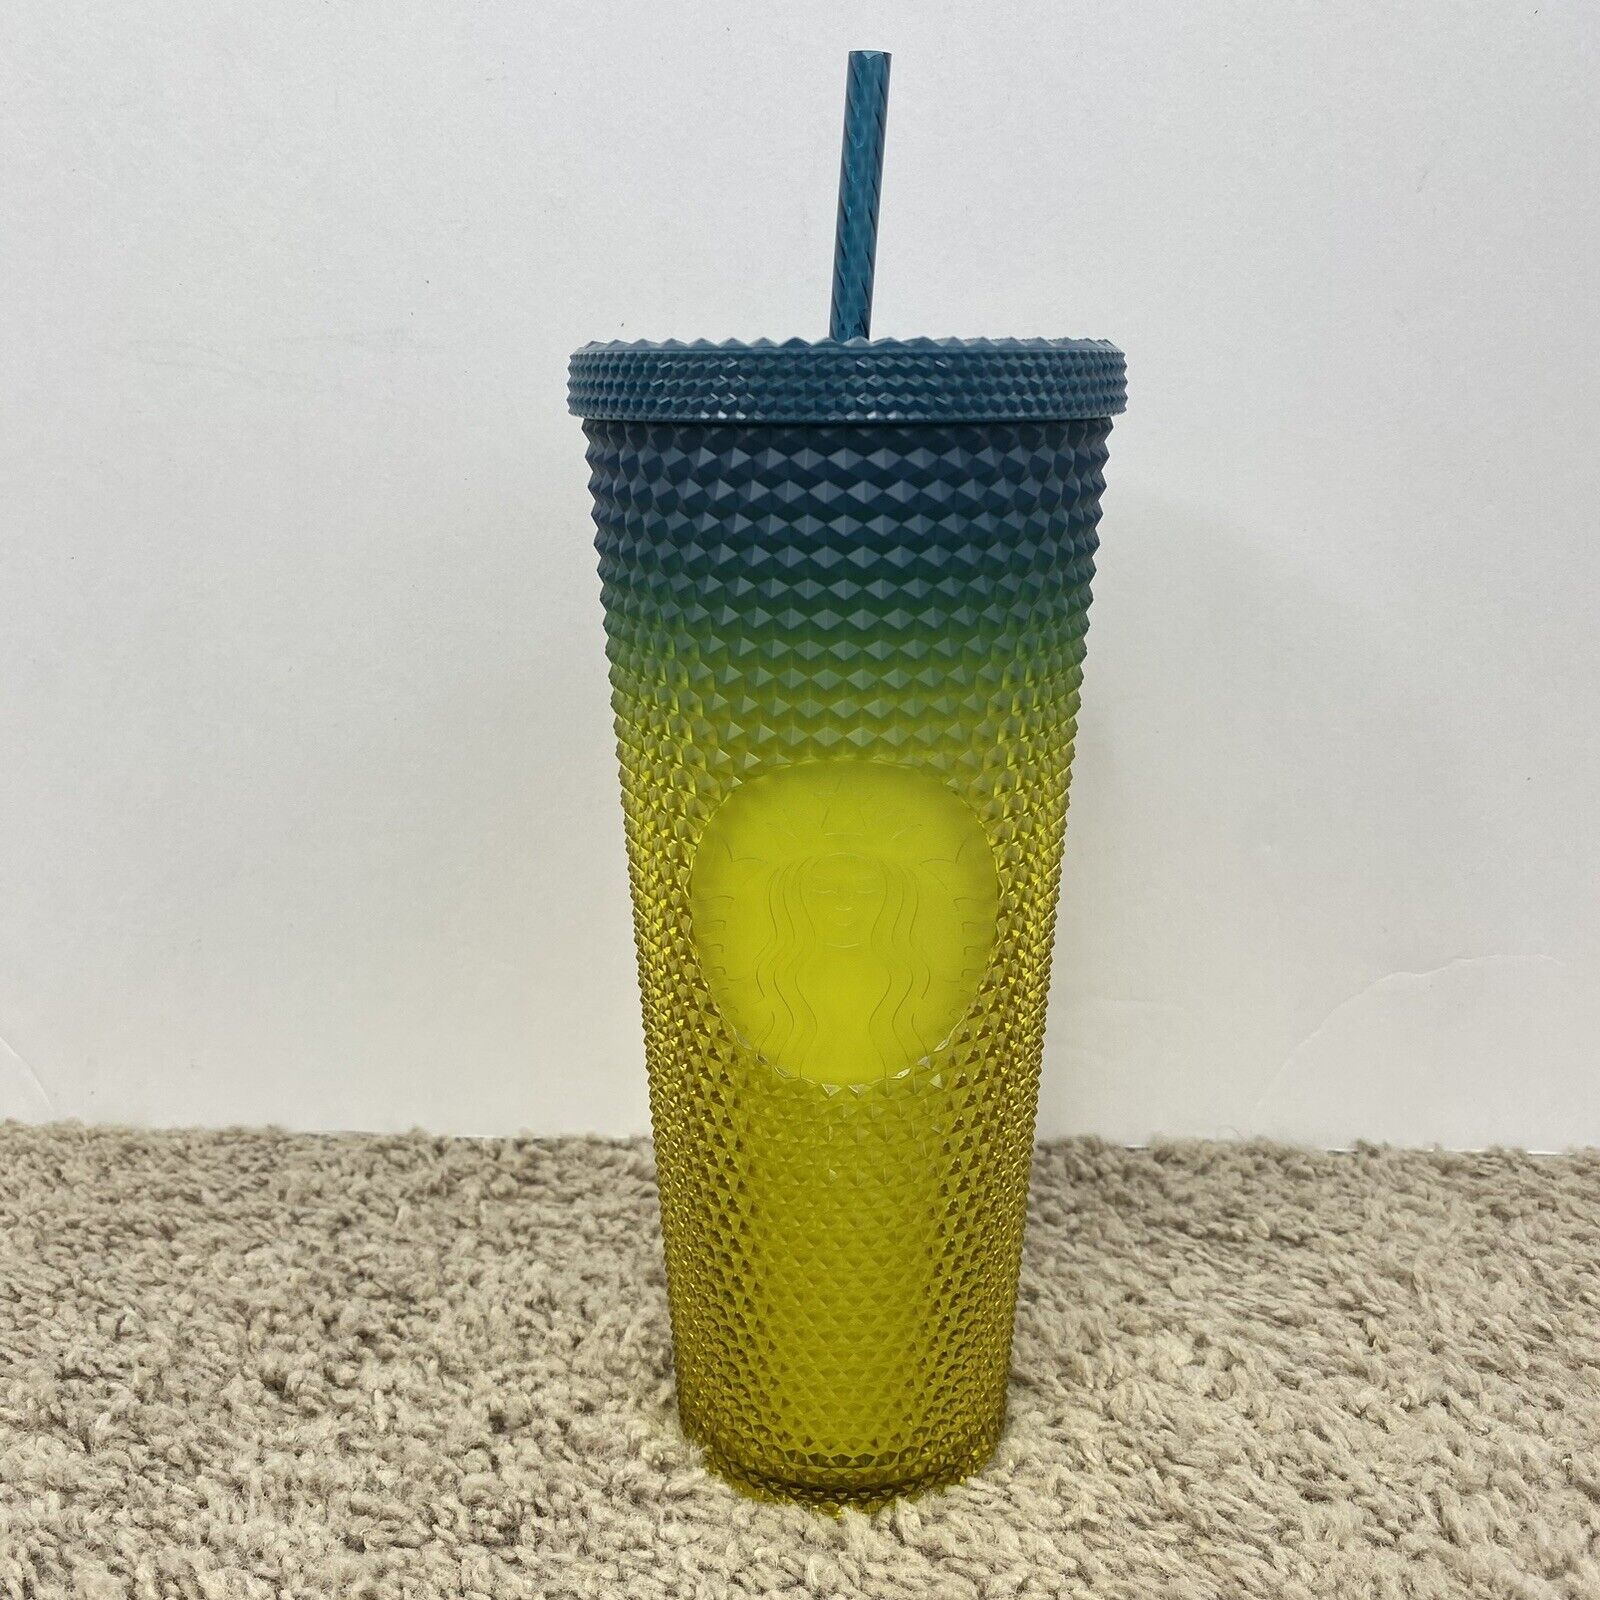 Starbucks Fall 2023 Teal/Yellow Ombre Studded Tumbler Cold Cup 24 oz Venti New